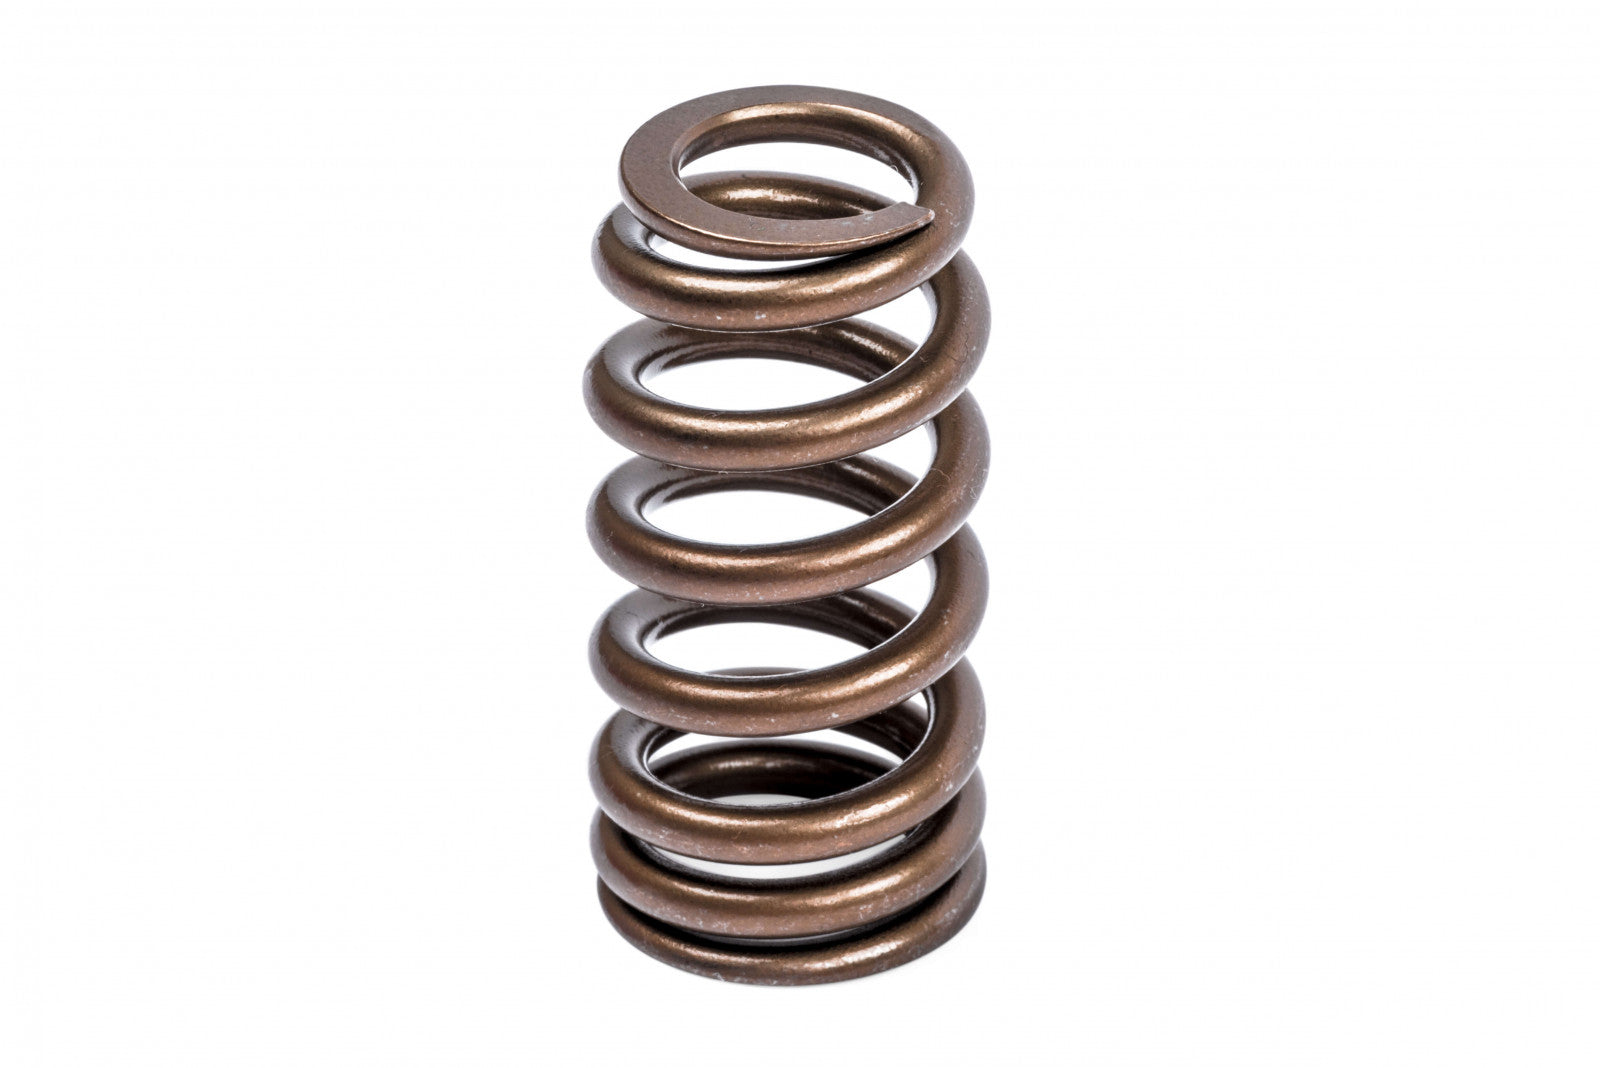 APR Valve Springs/Seats/Retainers - Set of 20